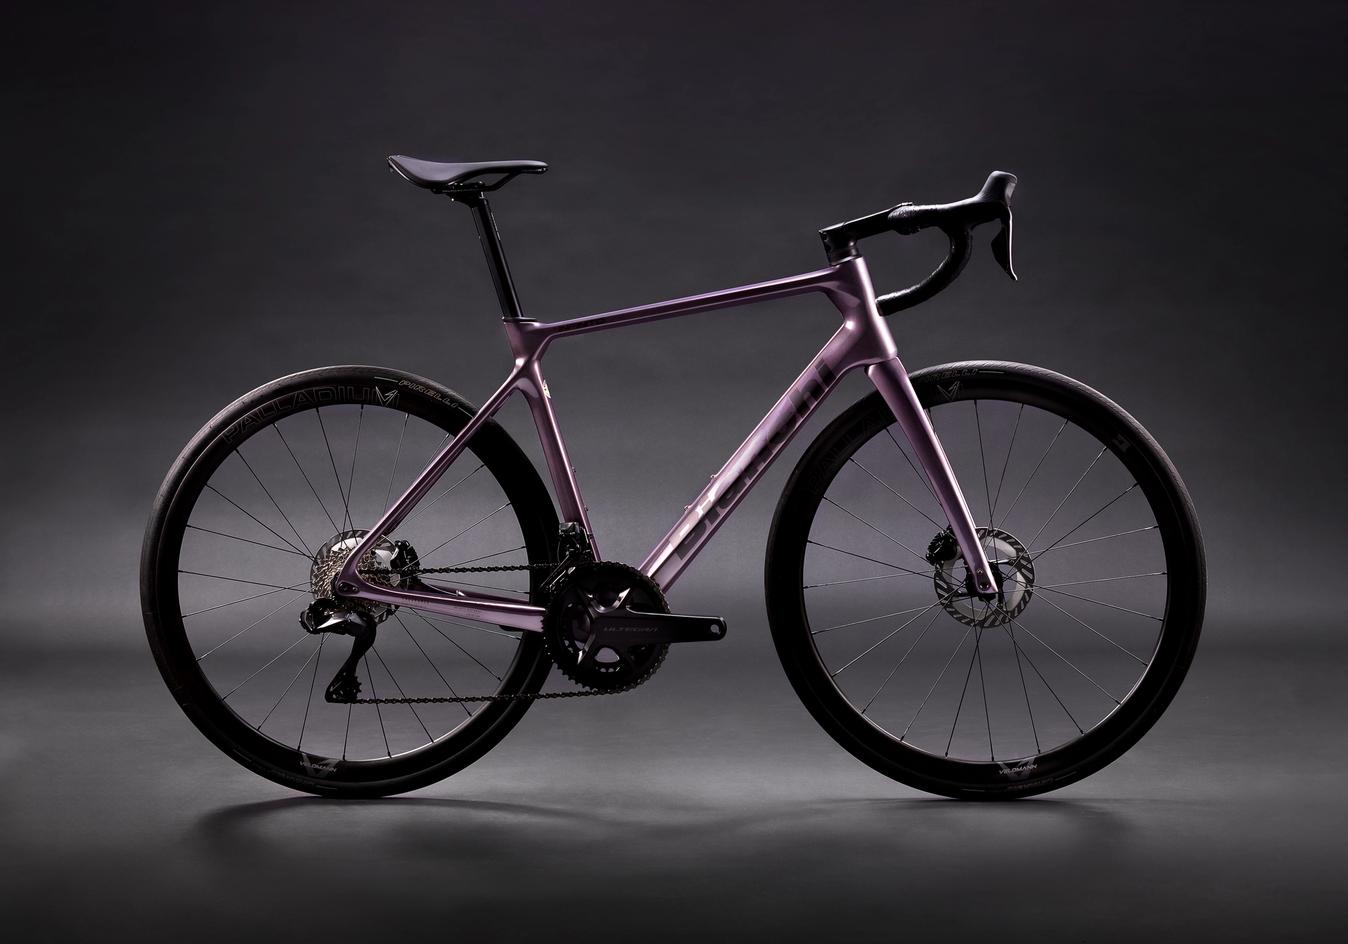 Joining the classic Celeste colourway is a new deep lustrous purple